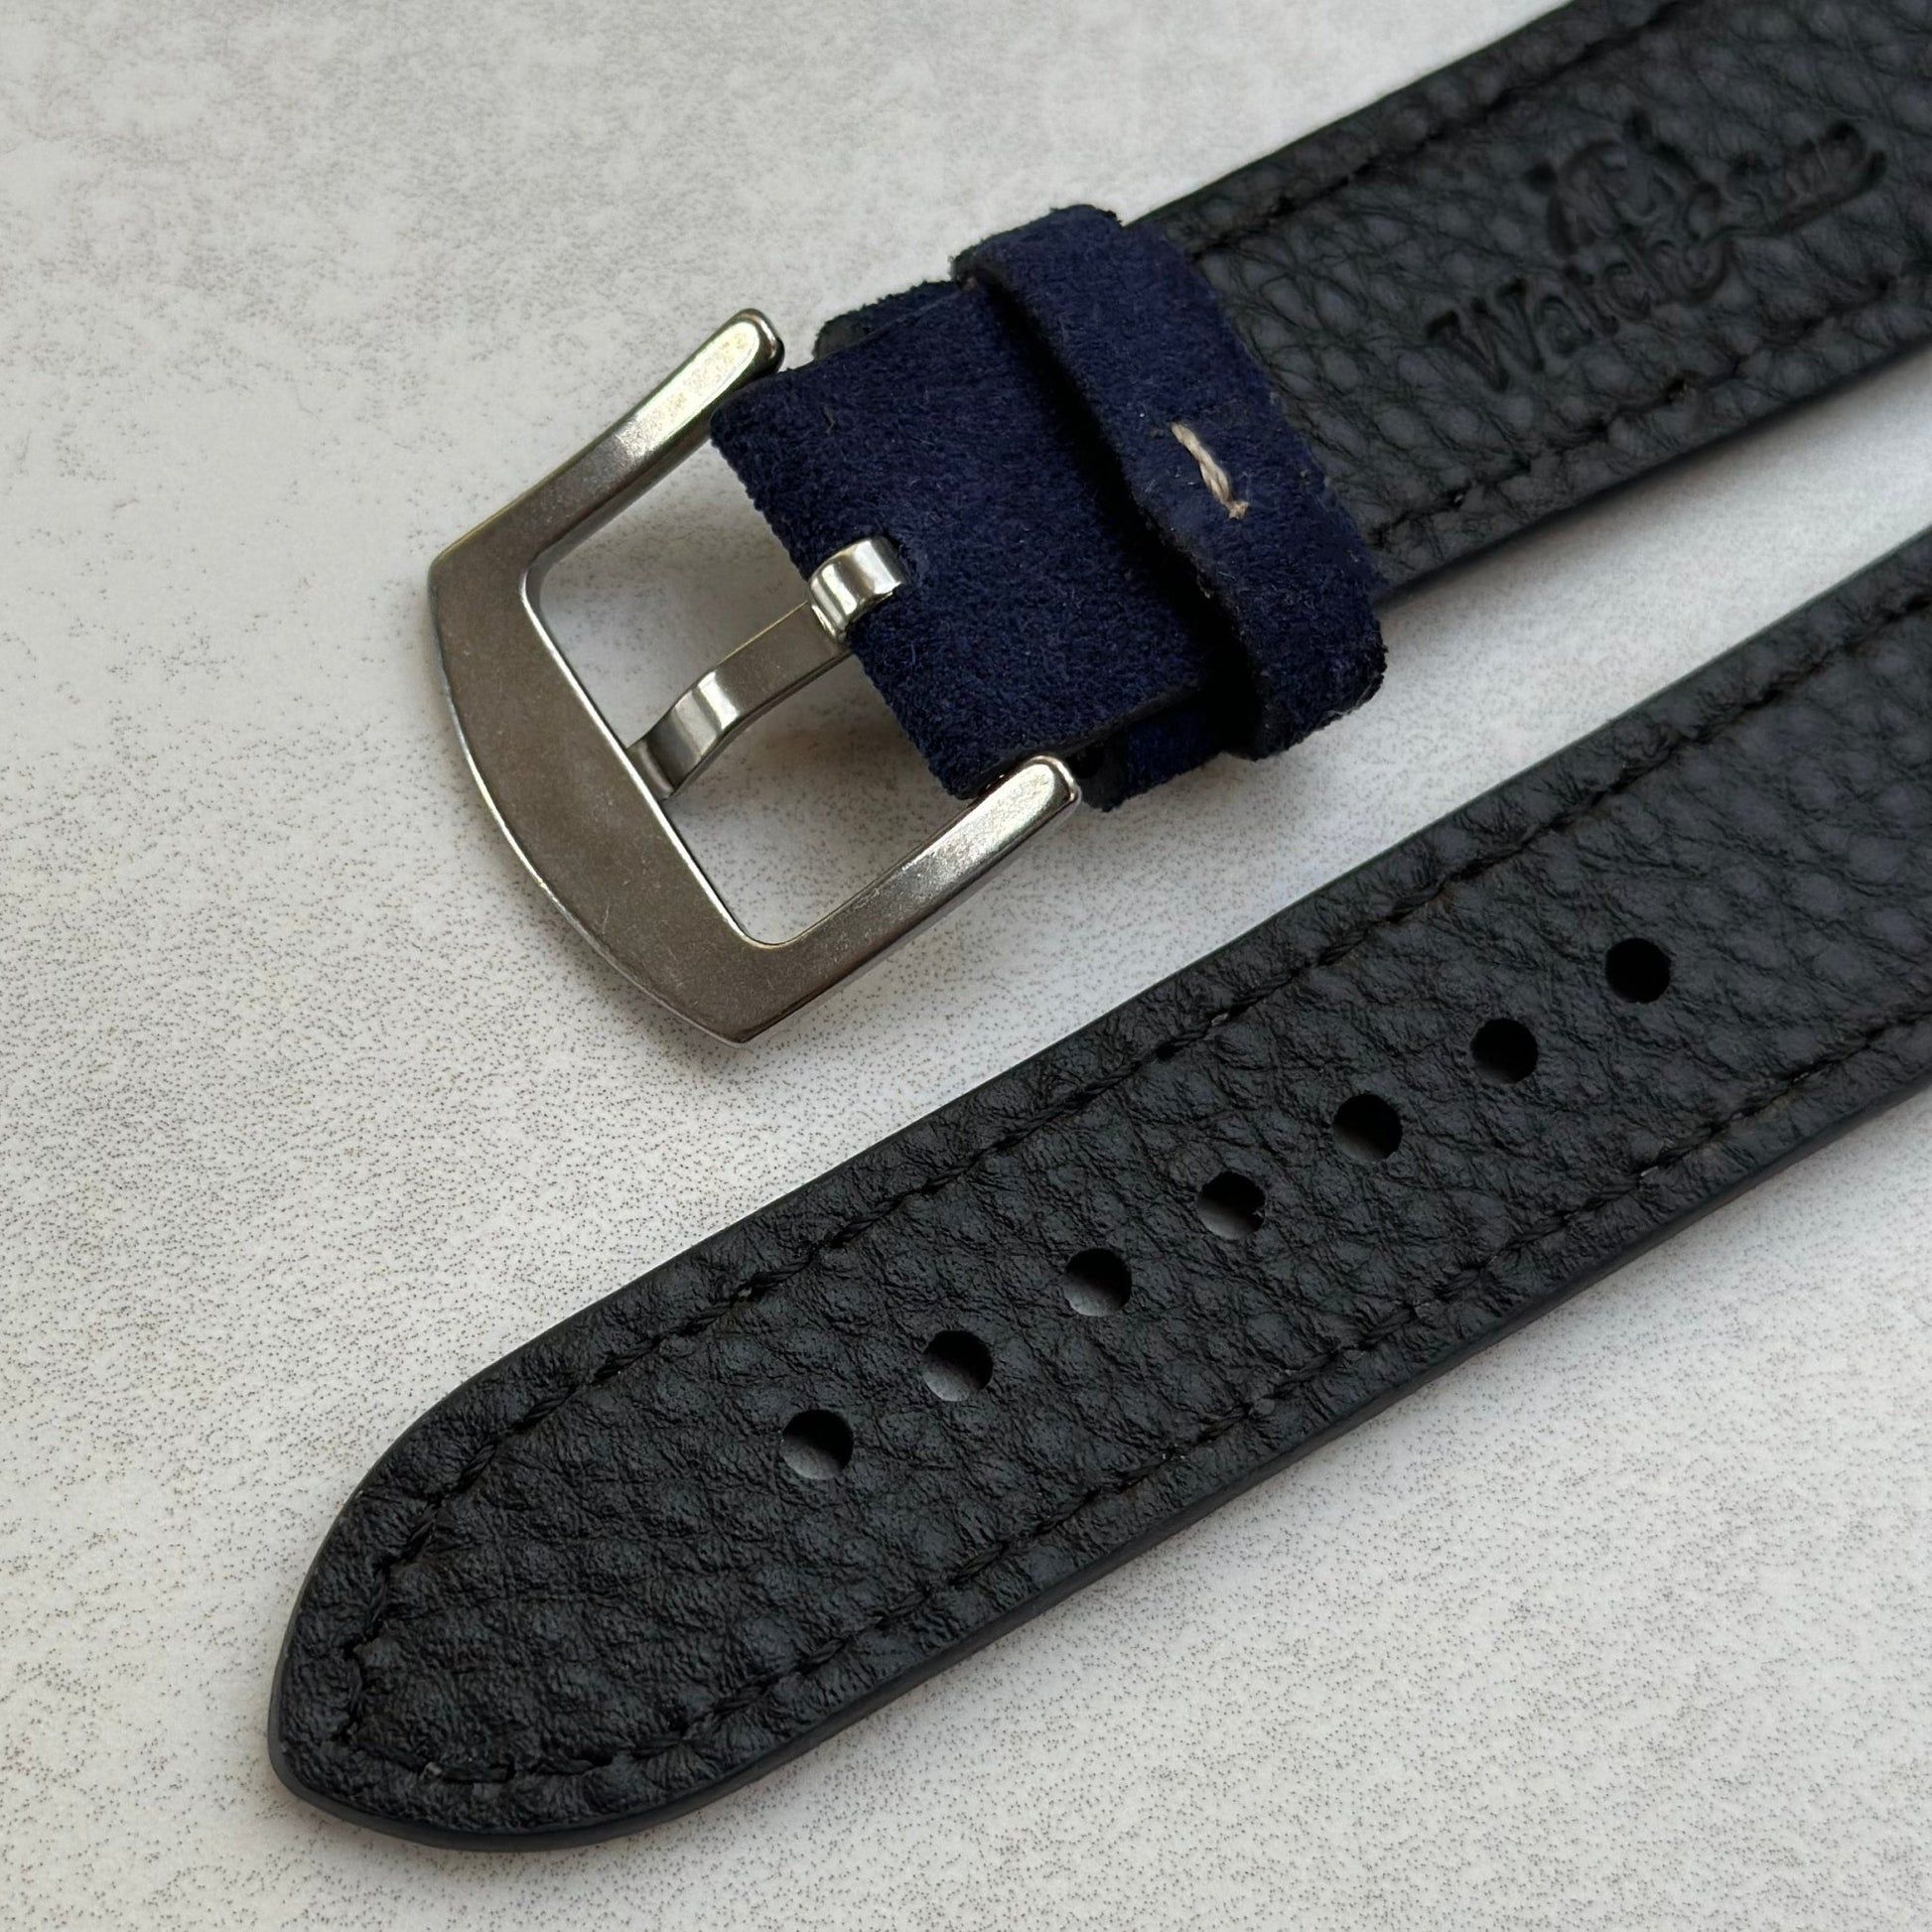 Stainless steel buckle on the Paris navy blue watch strap. 18mm, 20mm, 22mm, 24mm. Watch And Strap.